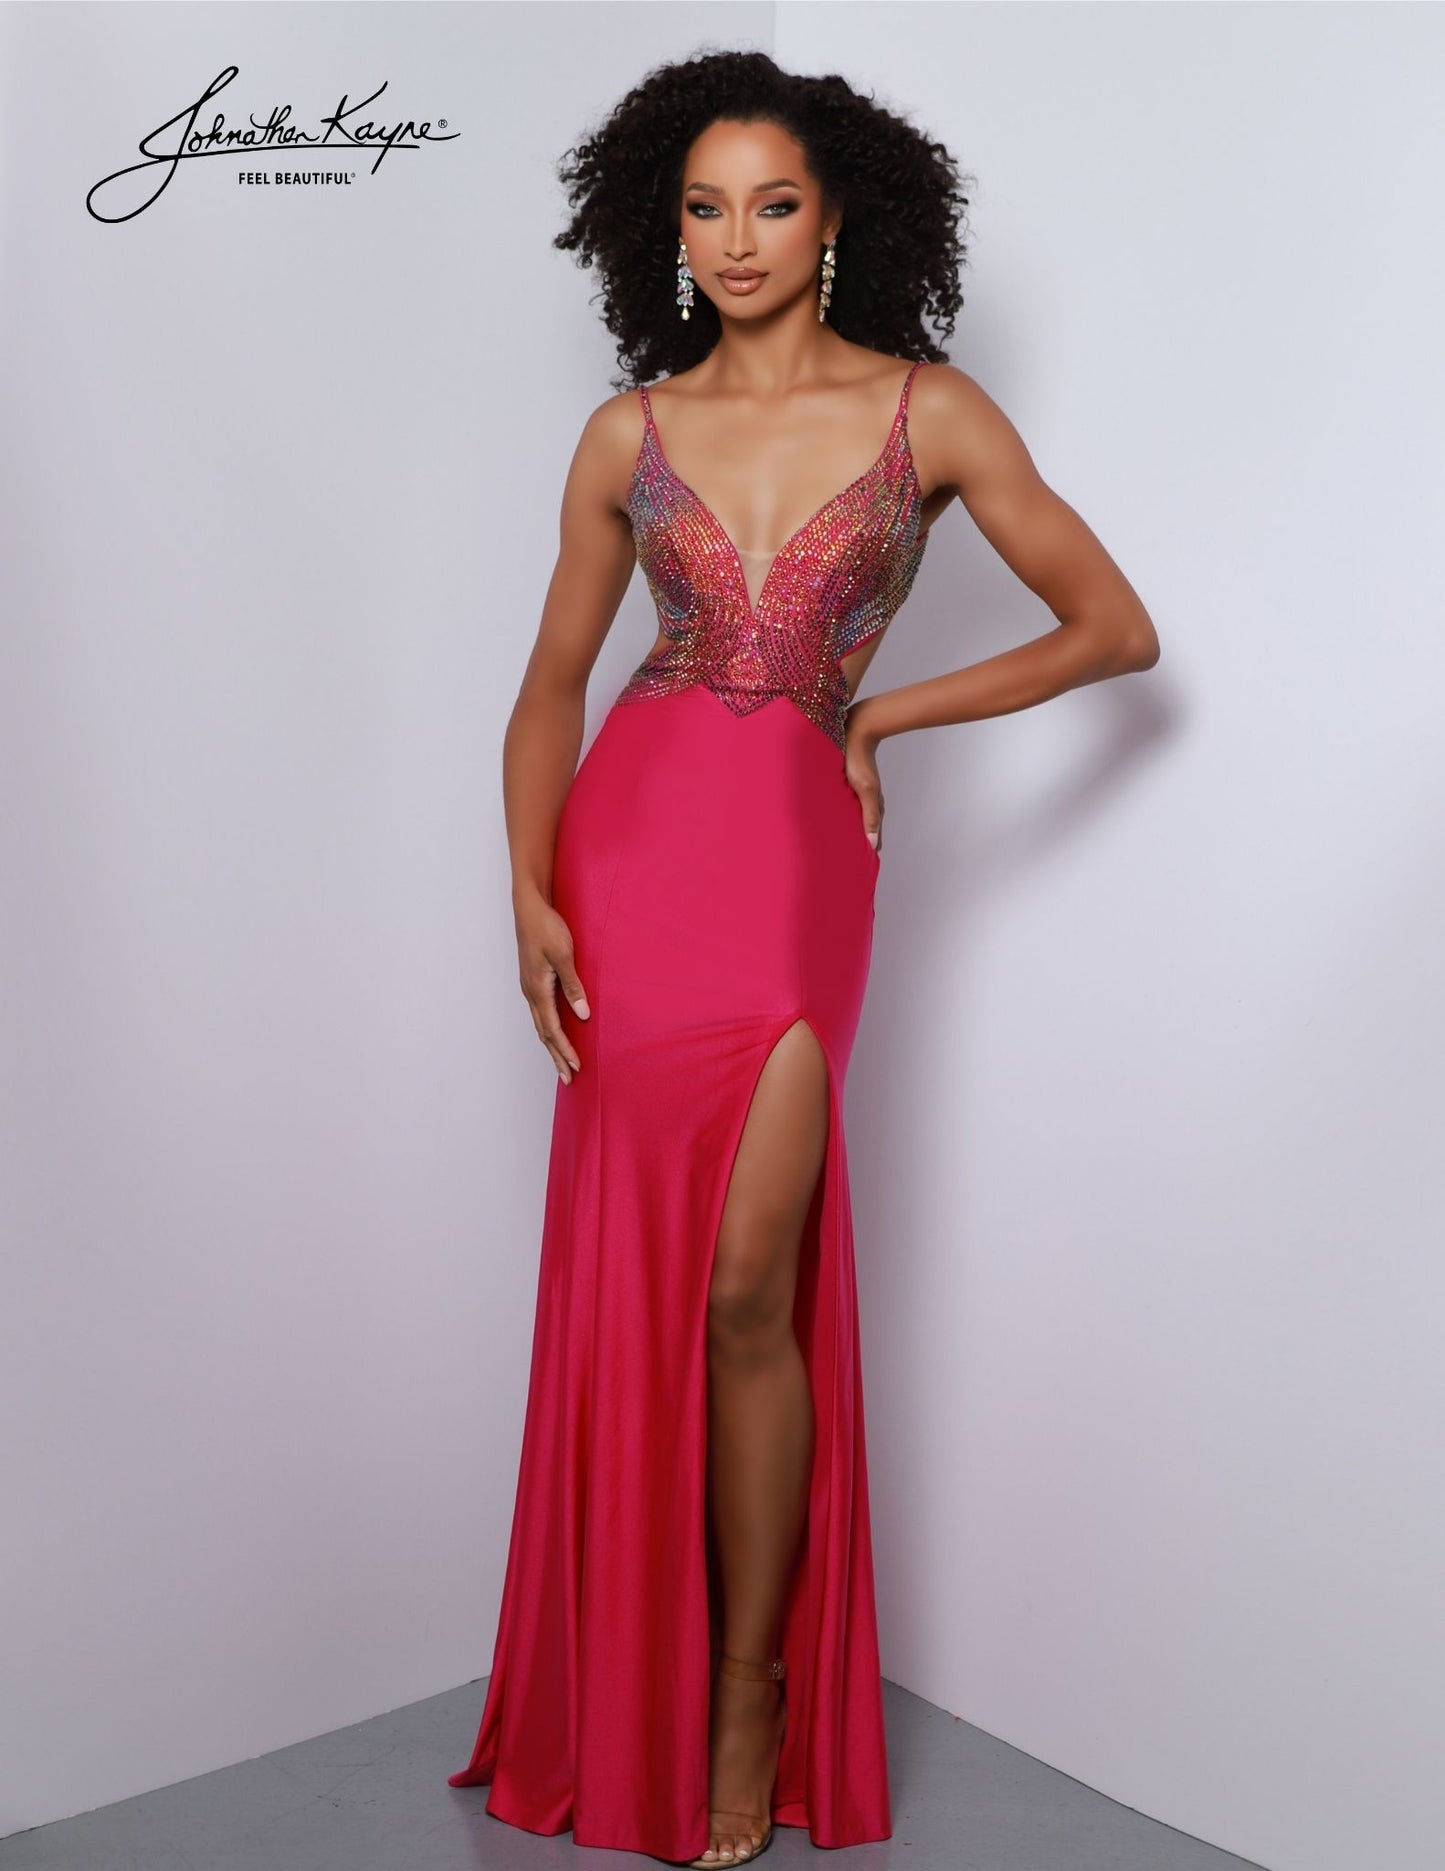 The Johnathan Kayne 2869 formal dress is a stunning choice for prom, pageant, and other special occasions. Featuring an ombre stoned design and plunging V neckline, this gown is sure to make an impression. It also has a cut-out train and sides for a unique and sophisticated look. The perfect prom dress is here! Featuring an ombre stoned bodice with side cut outs and a low back, you are sure to be the best dressed in this.